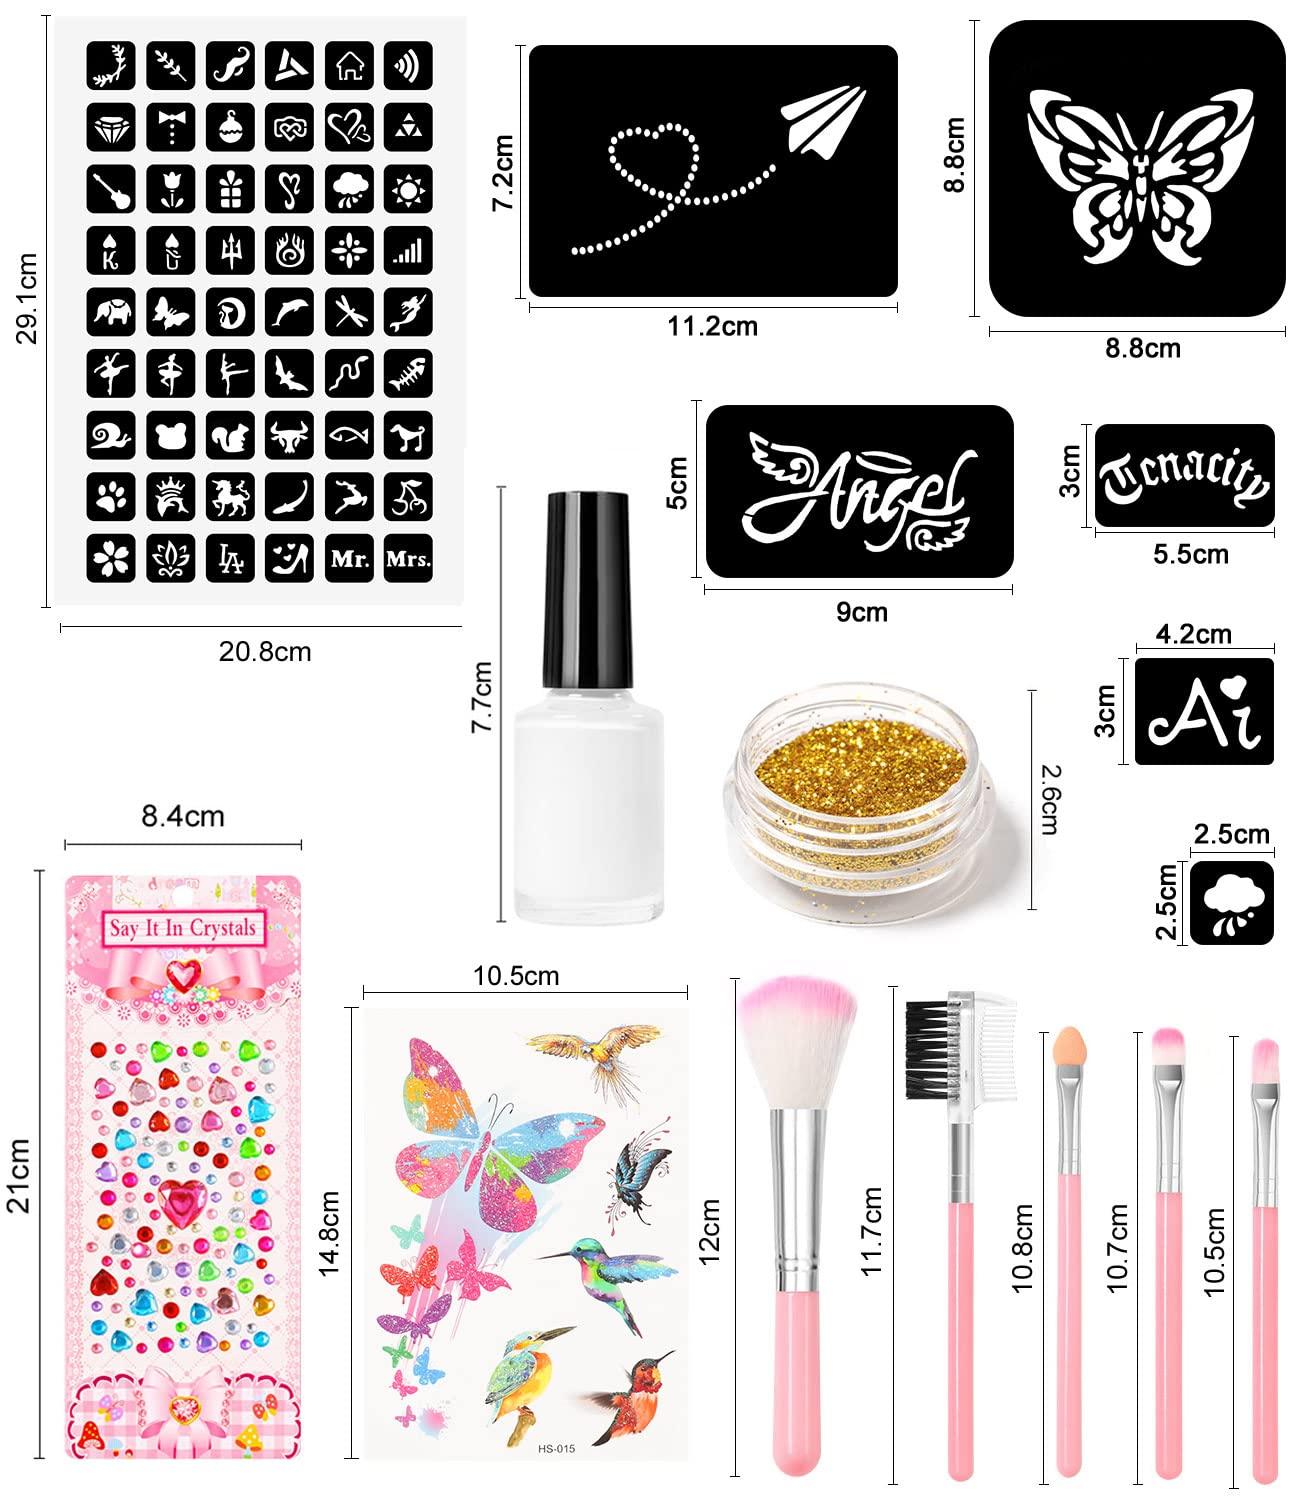 Temporary Glitter Tattoos Kids,32 Glitter Colors and 6 Fluorescent  Colors,165 Stencils,2 diamond stickers,3 Glue,5 Brushes,1 Powder  Puff,Adults and